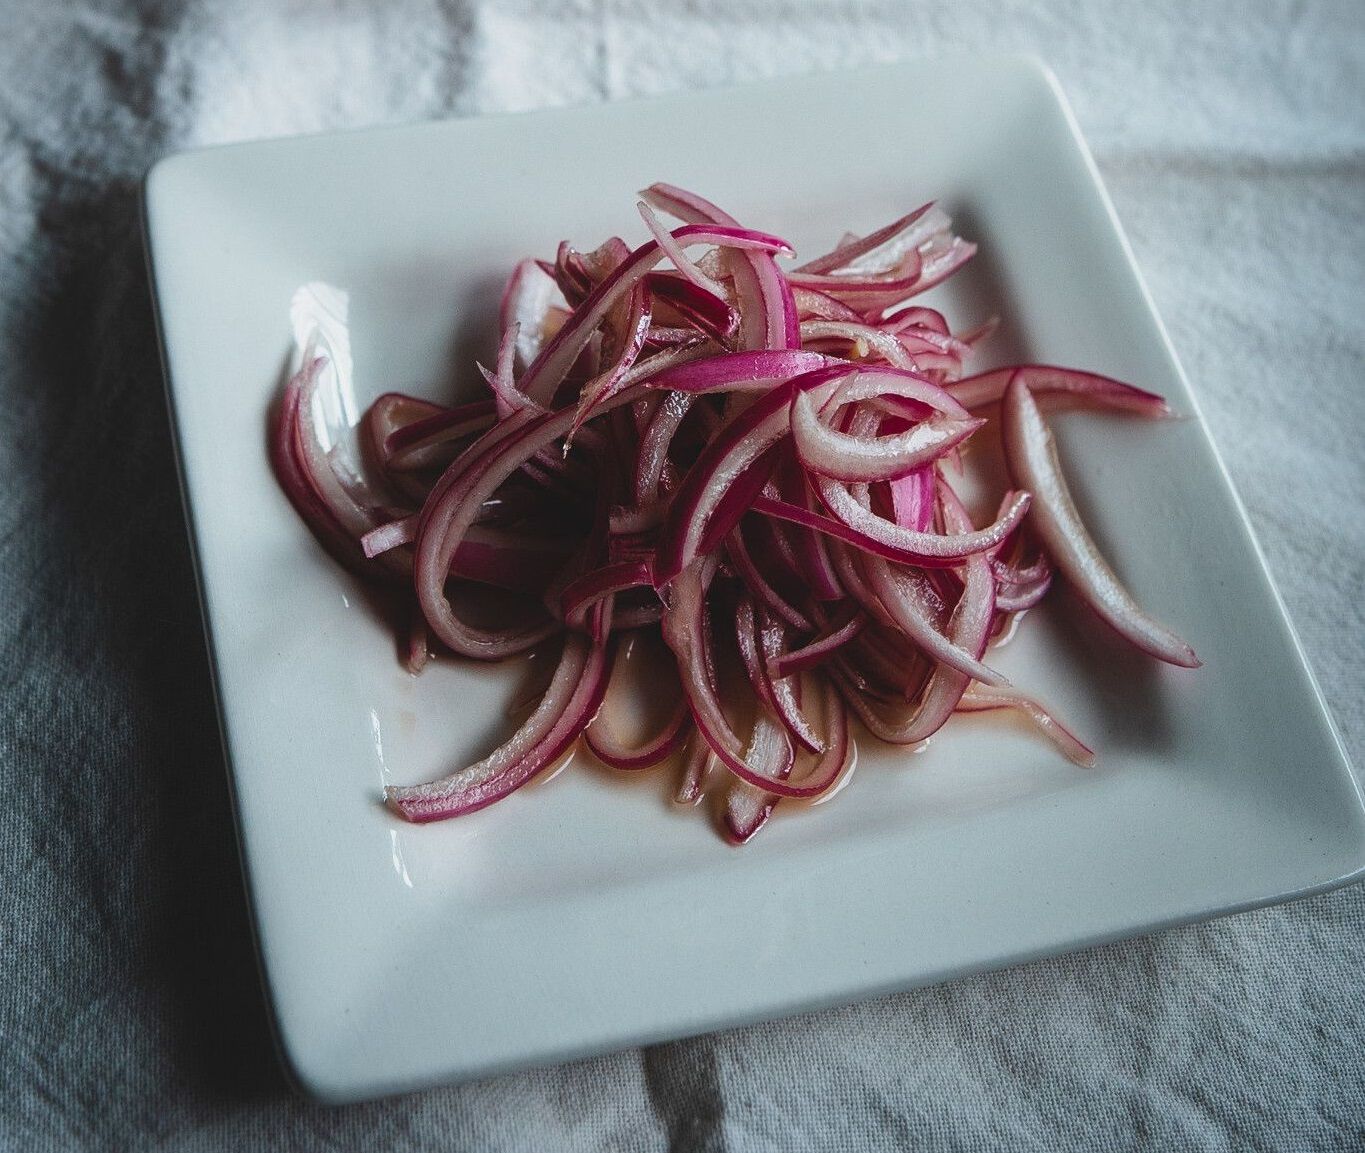 Pickled red Onions